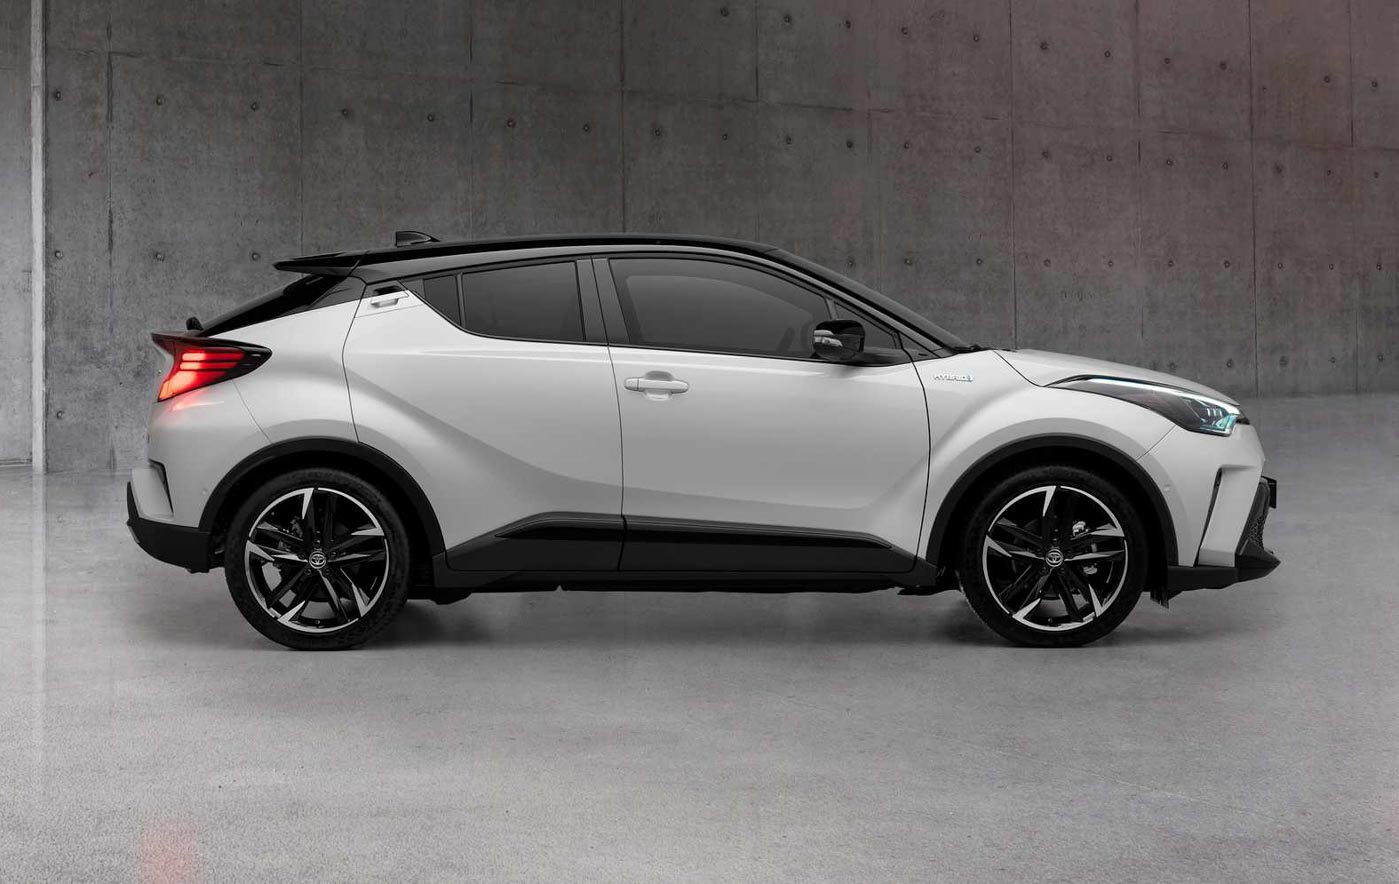 Toyota Confirms Launch Of An All-Electric SUV Next Year